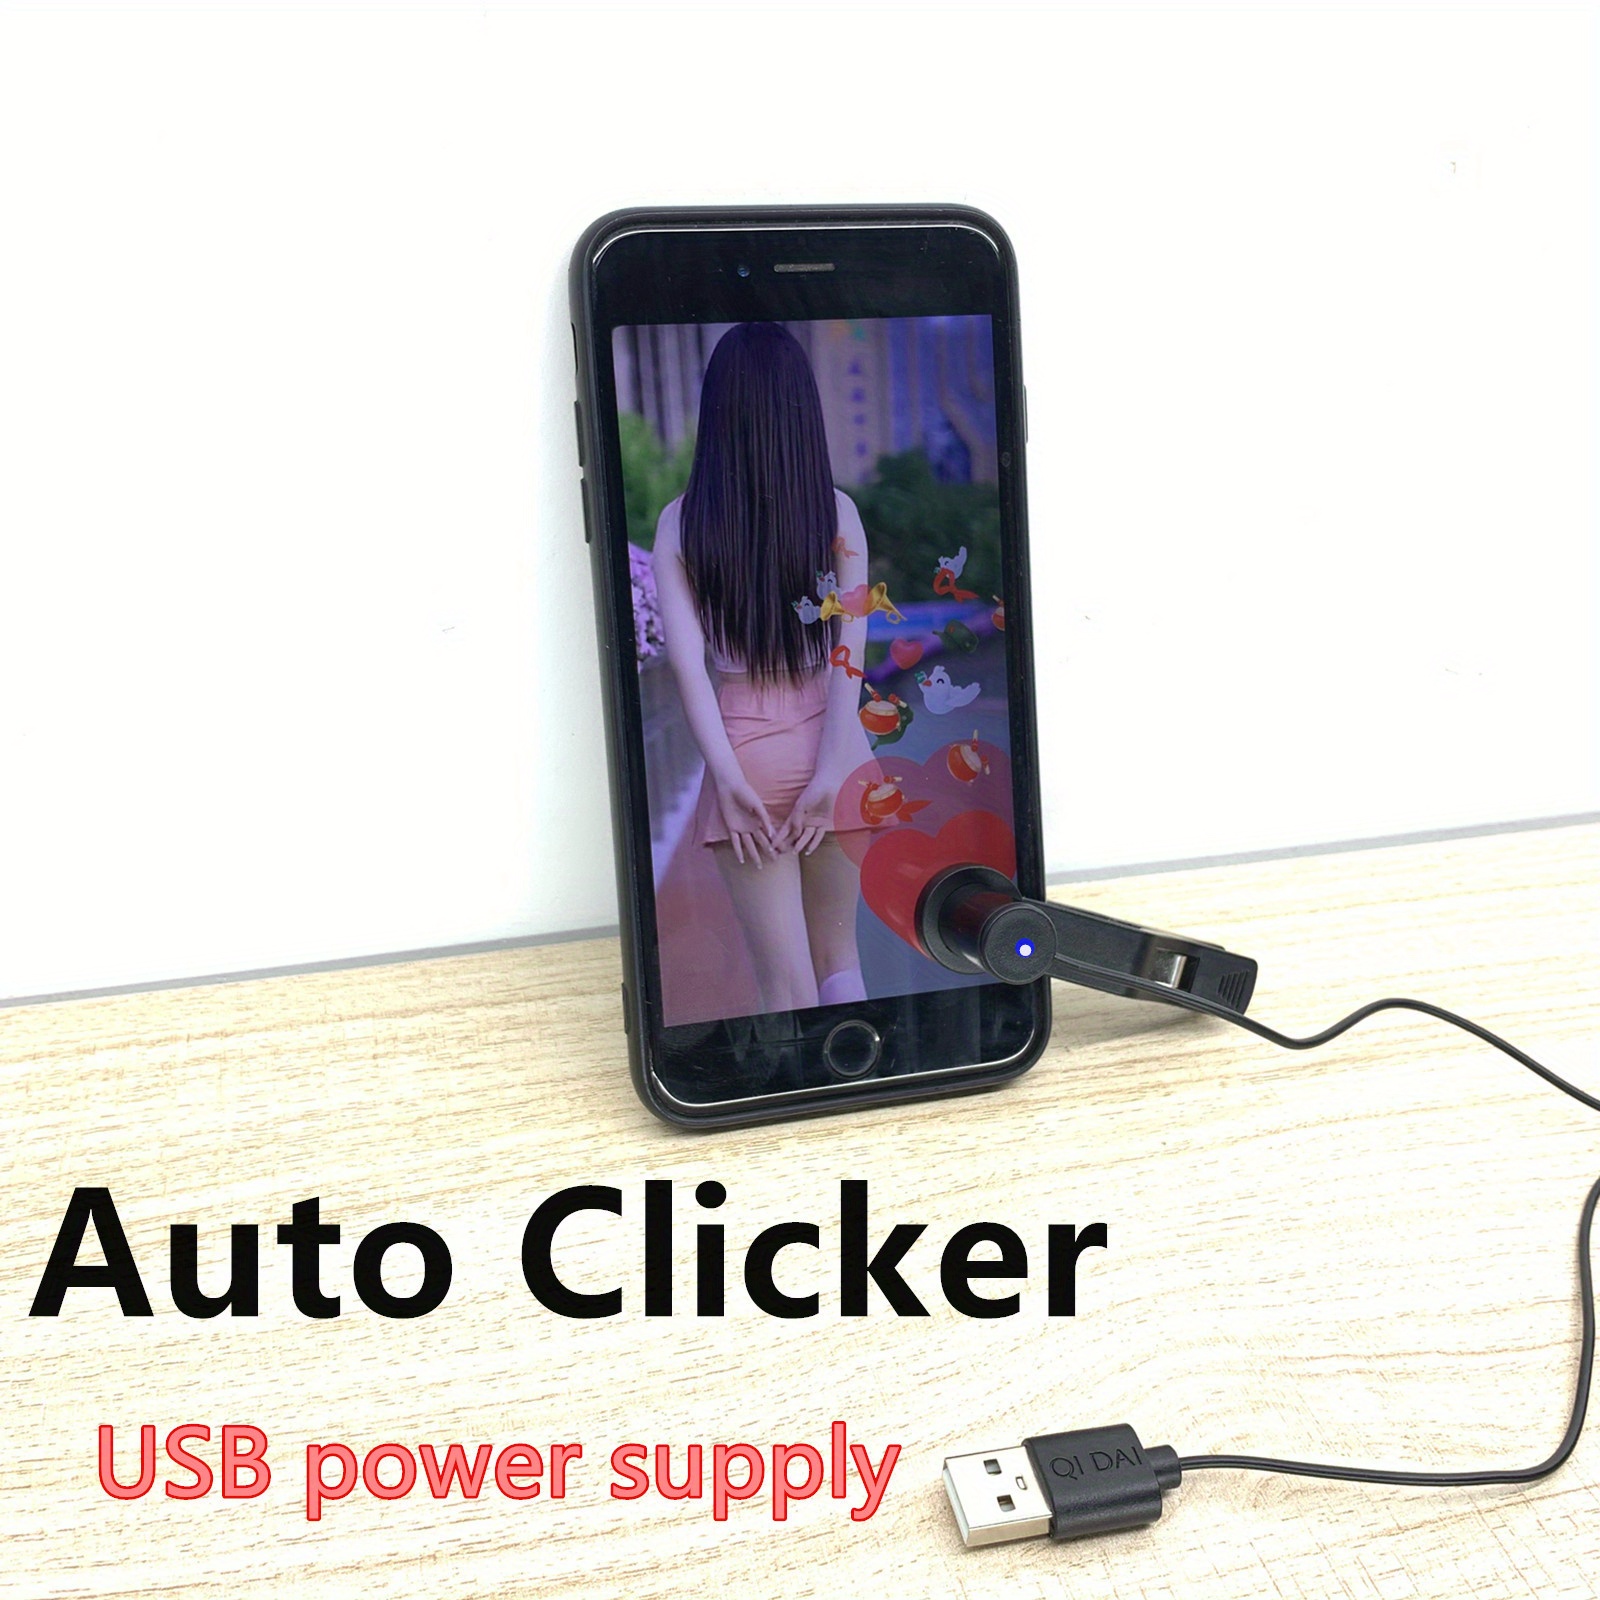 Speed Auto Clicker - Product Information, Latest Updates, and